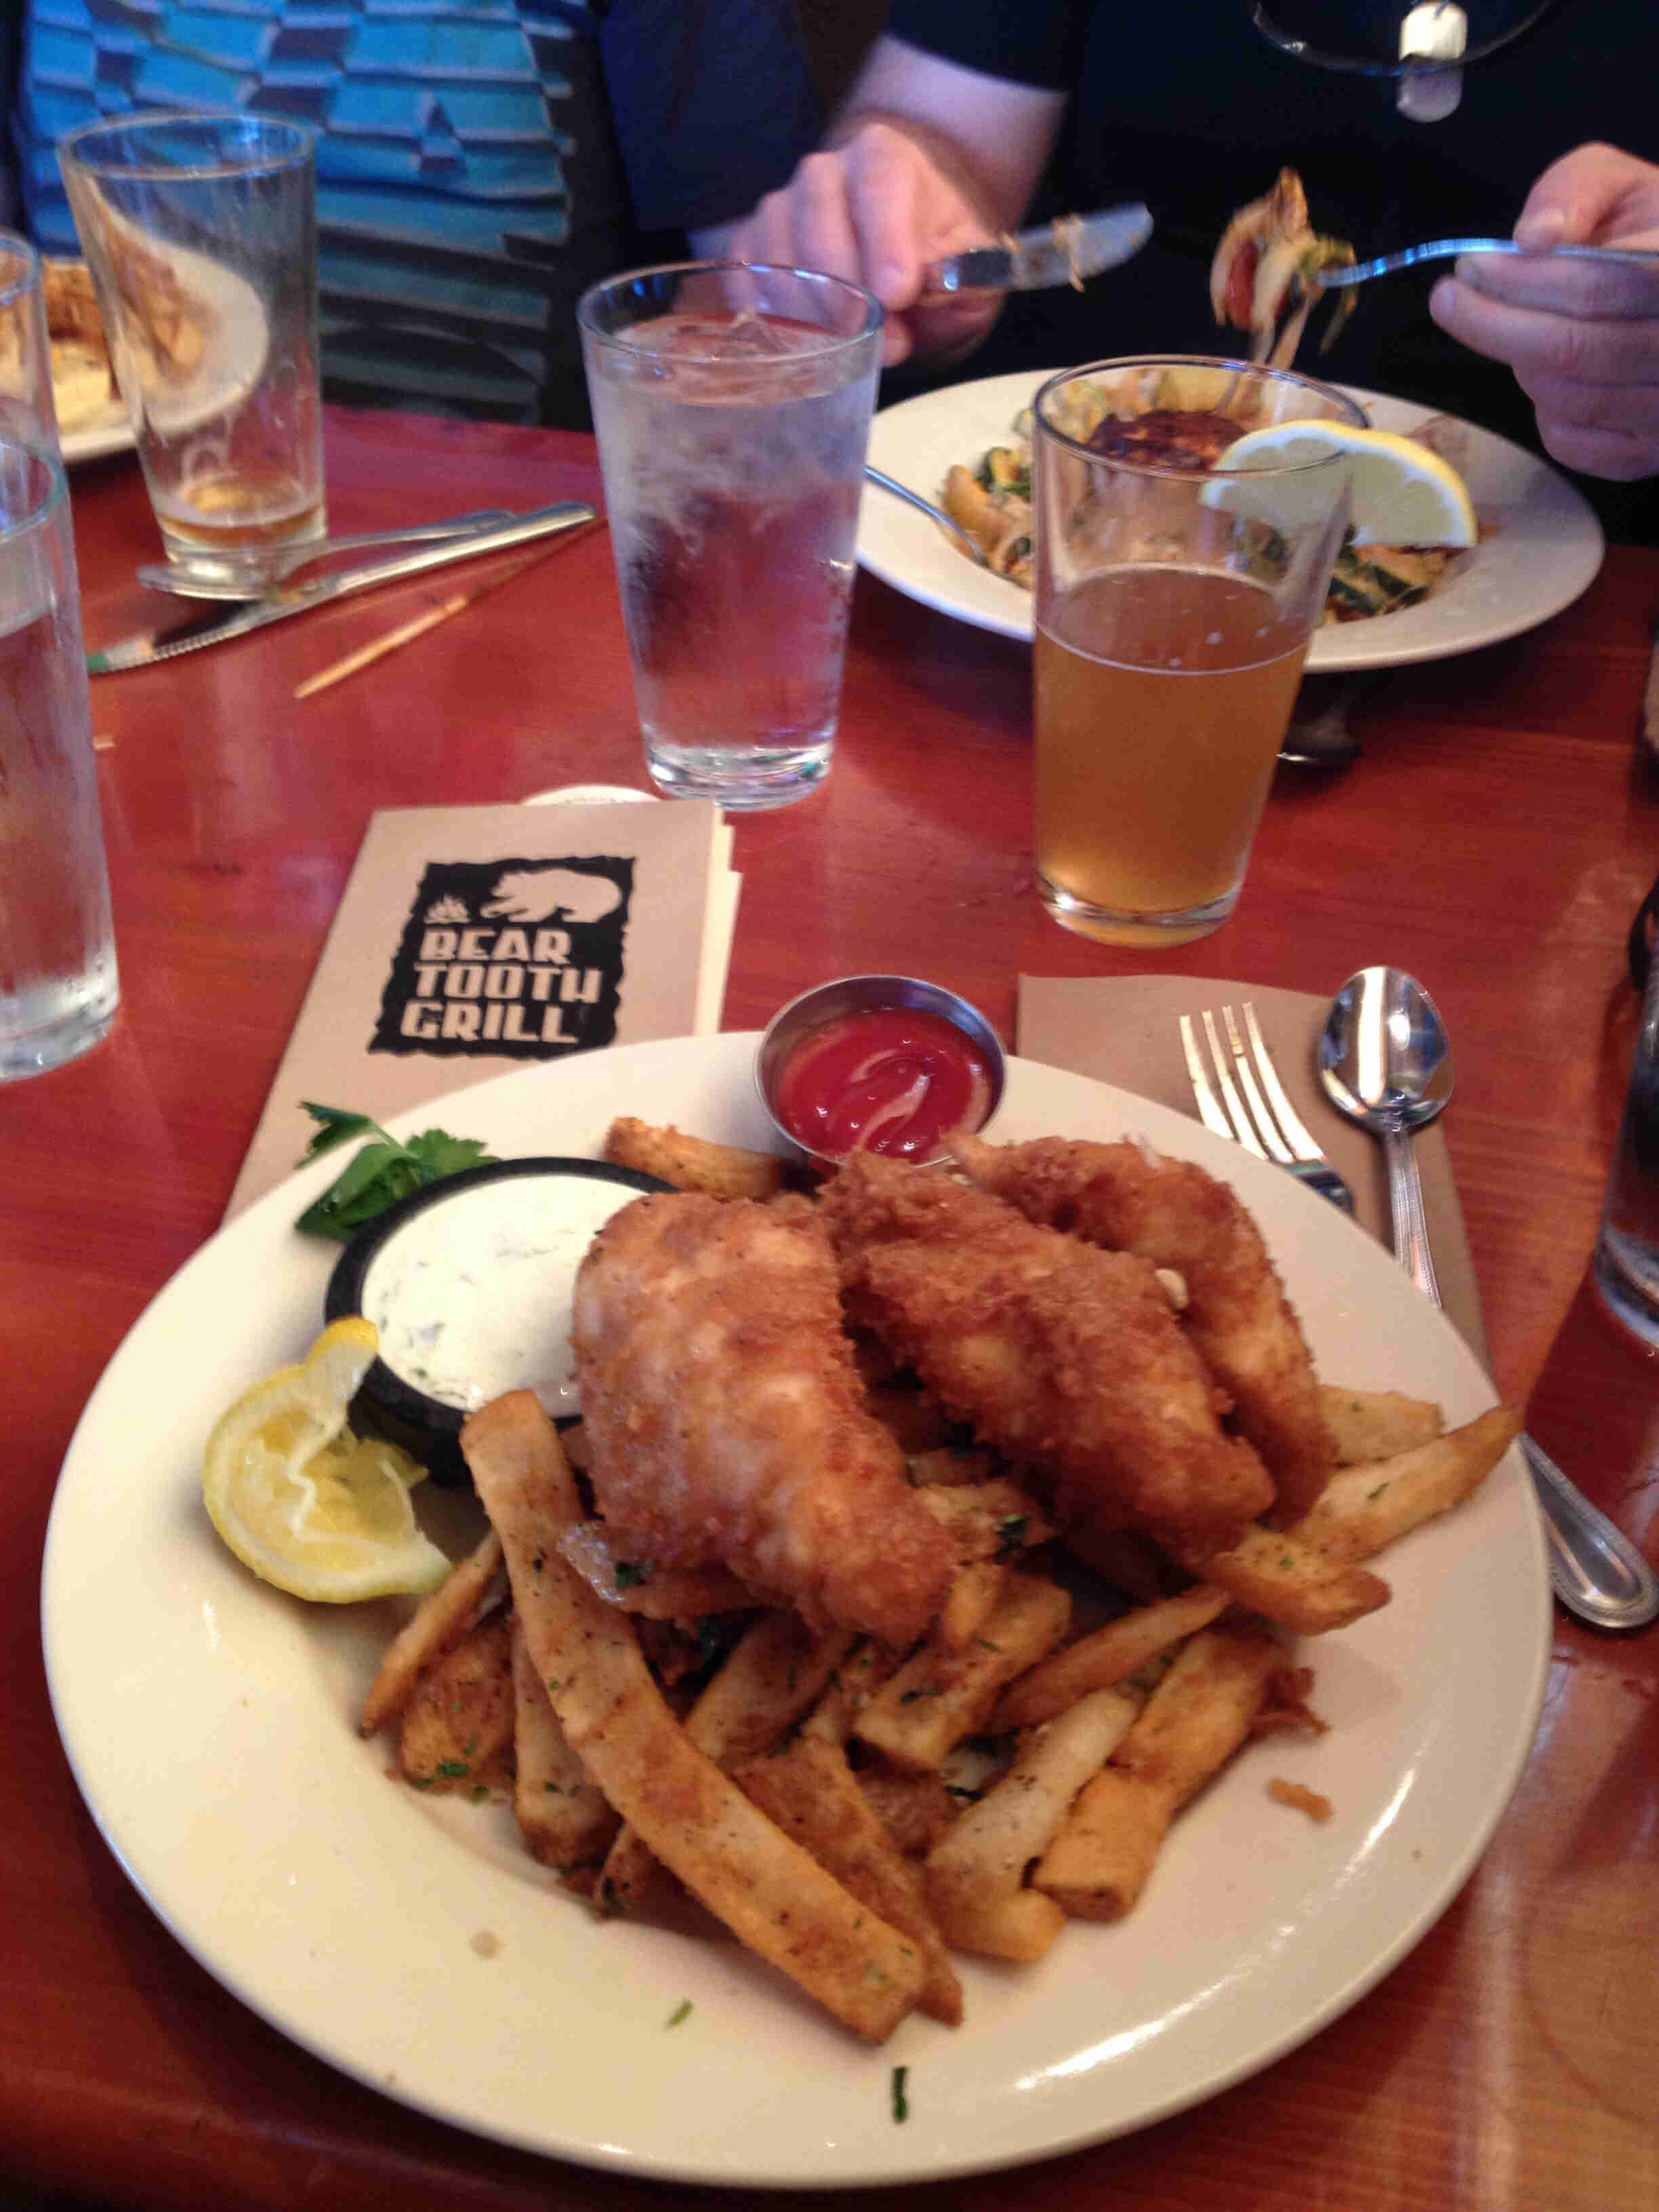 Downward view of a plate with fish and fries, sitting on a table with a glass of beer and another plate